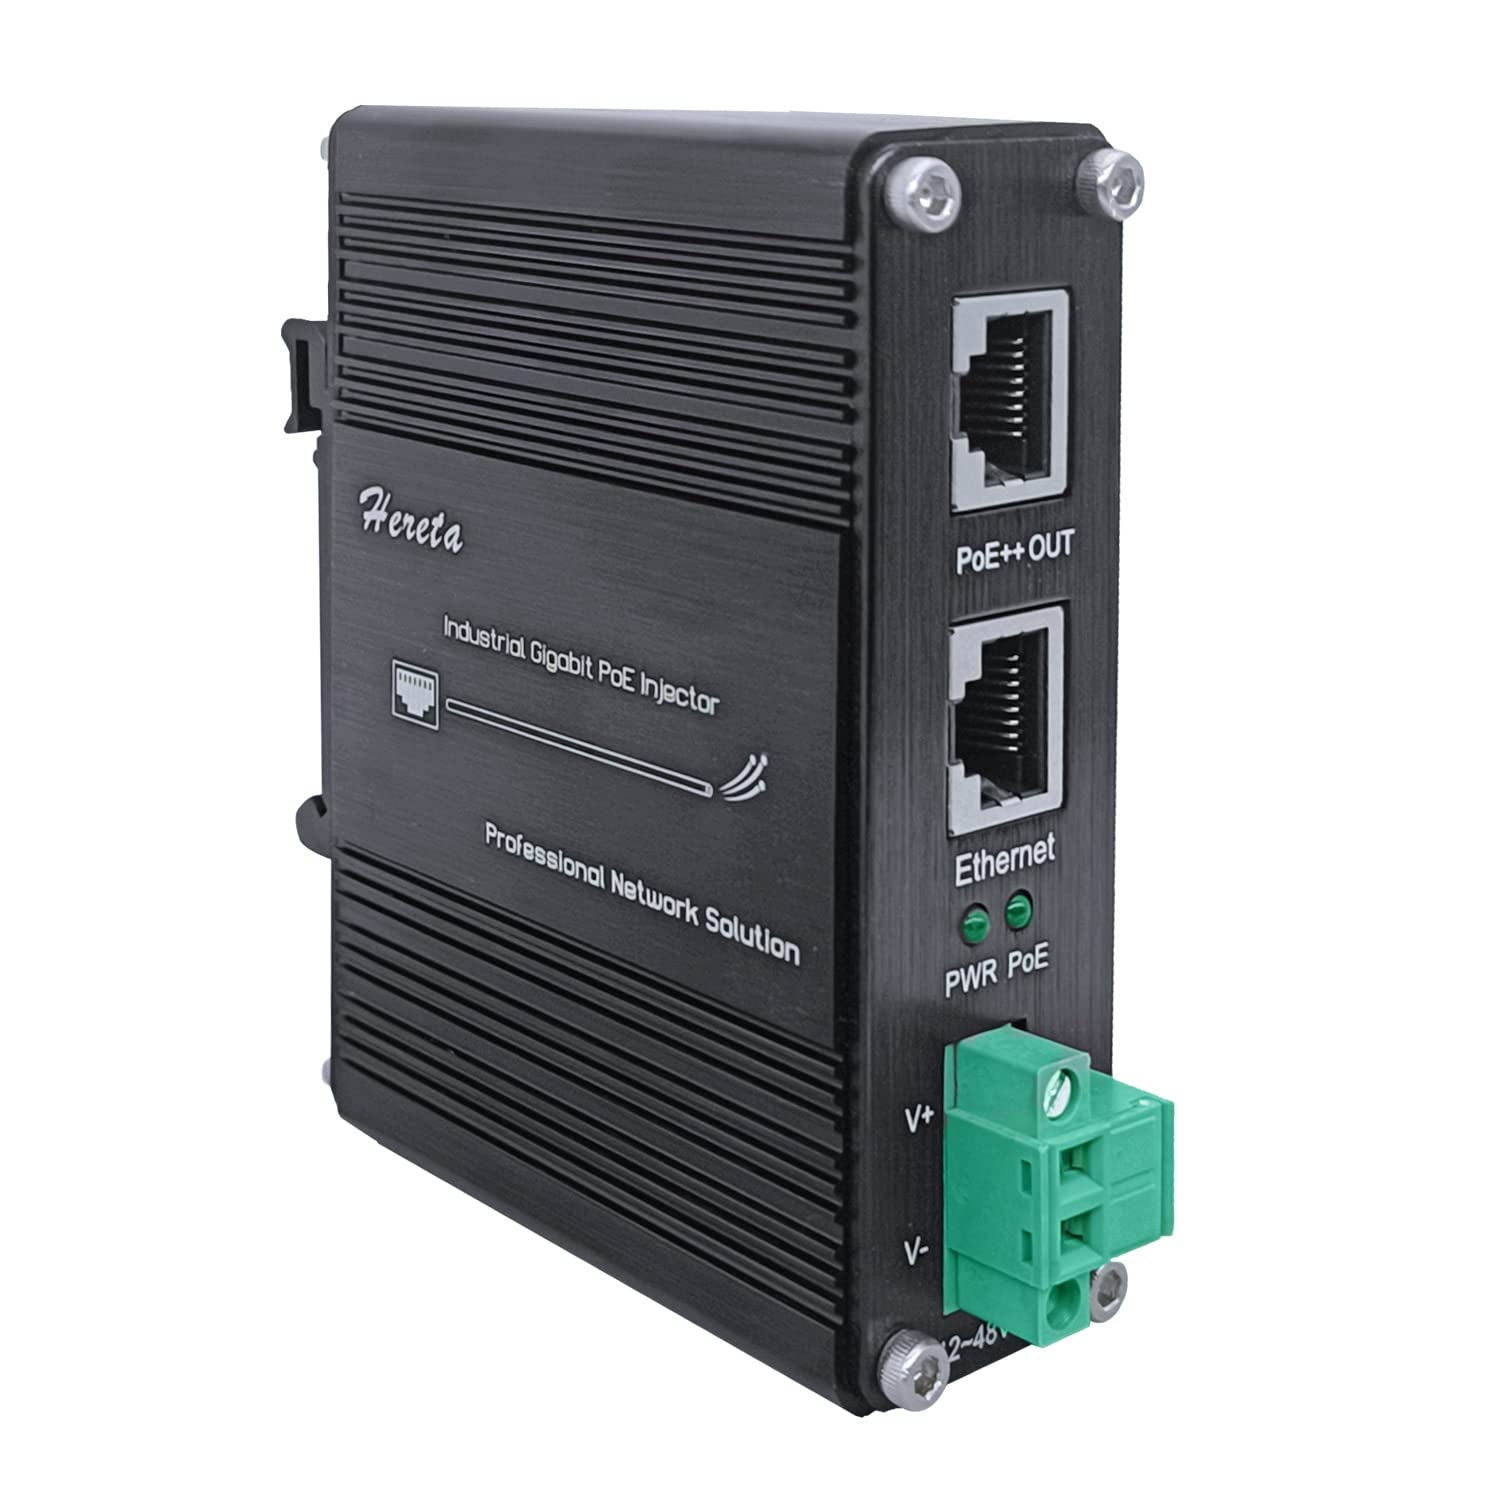 Hardened Industrial Gigabit Poe++ Injector 12-48VDC Input with Din-Rail and Wall Mount Connecting the IEEE 802.3 at Poe Device (95W)